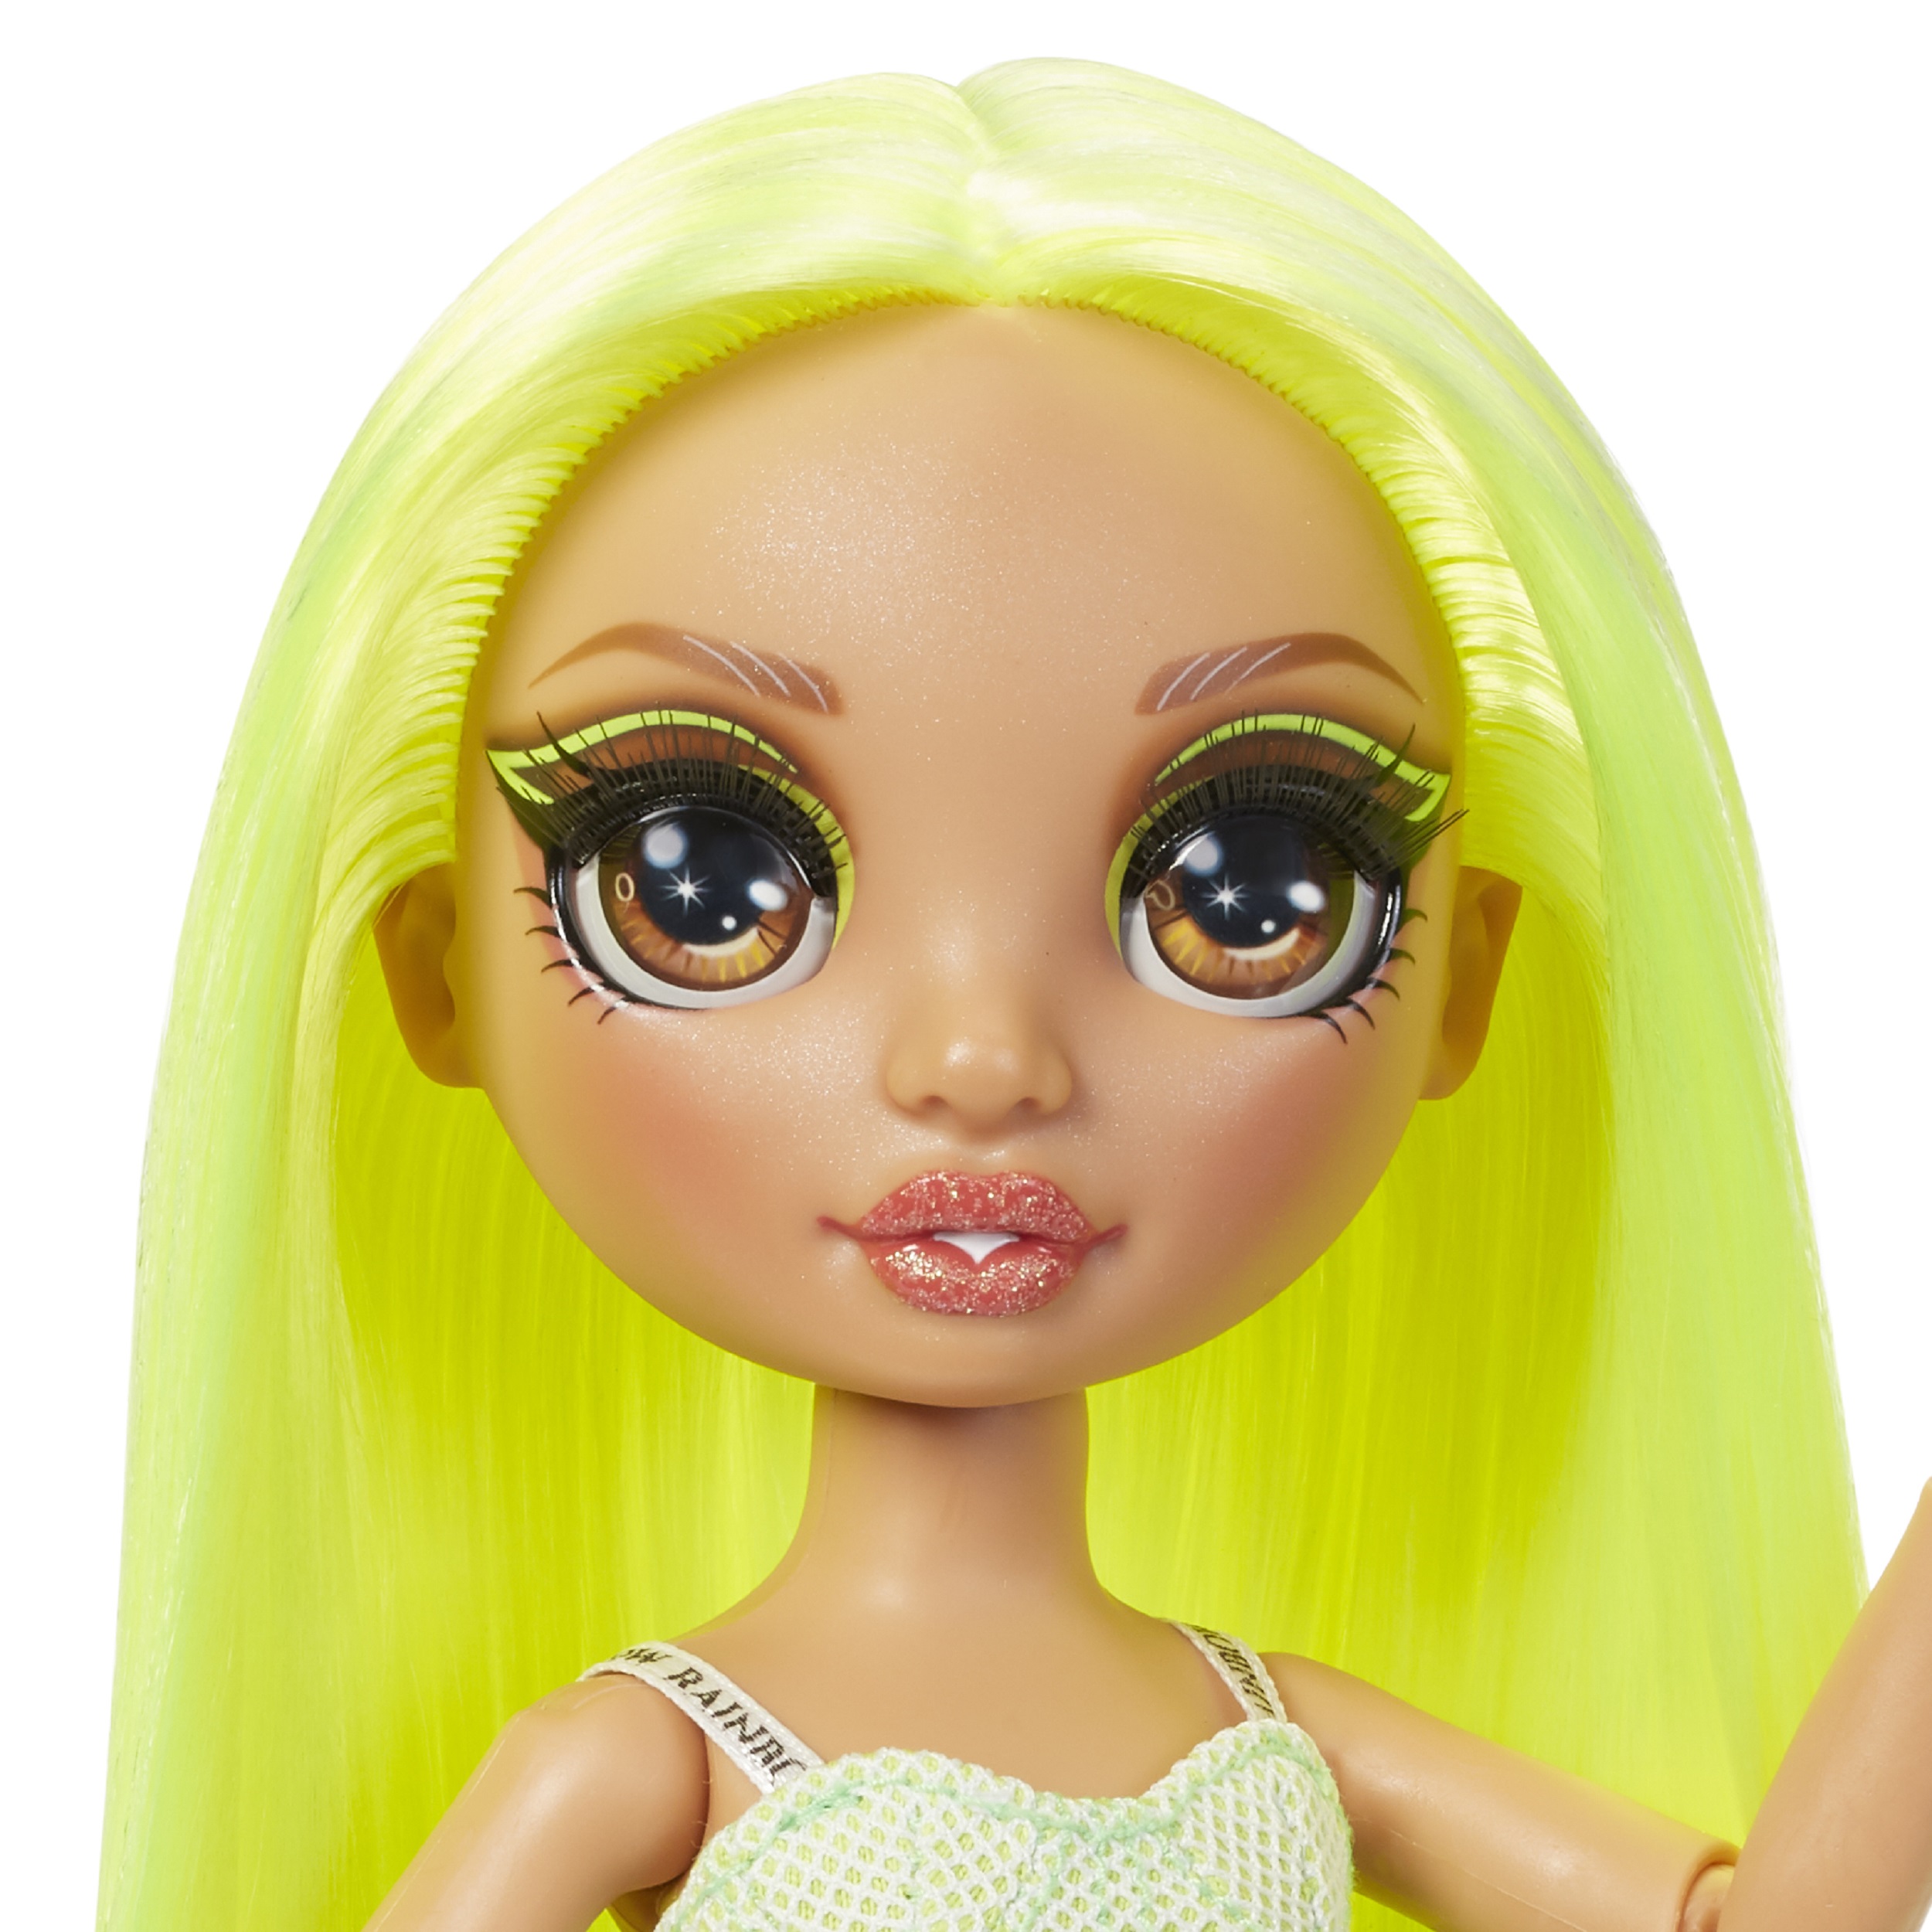 Rainbow High Karma Nichols – Neon Green Fashion Doll with 2 Complete Mix & Match Outfits and Accessories, Toys for Kids 6-12 Years Old - image 7 of 9